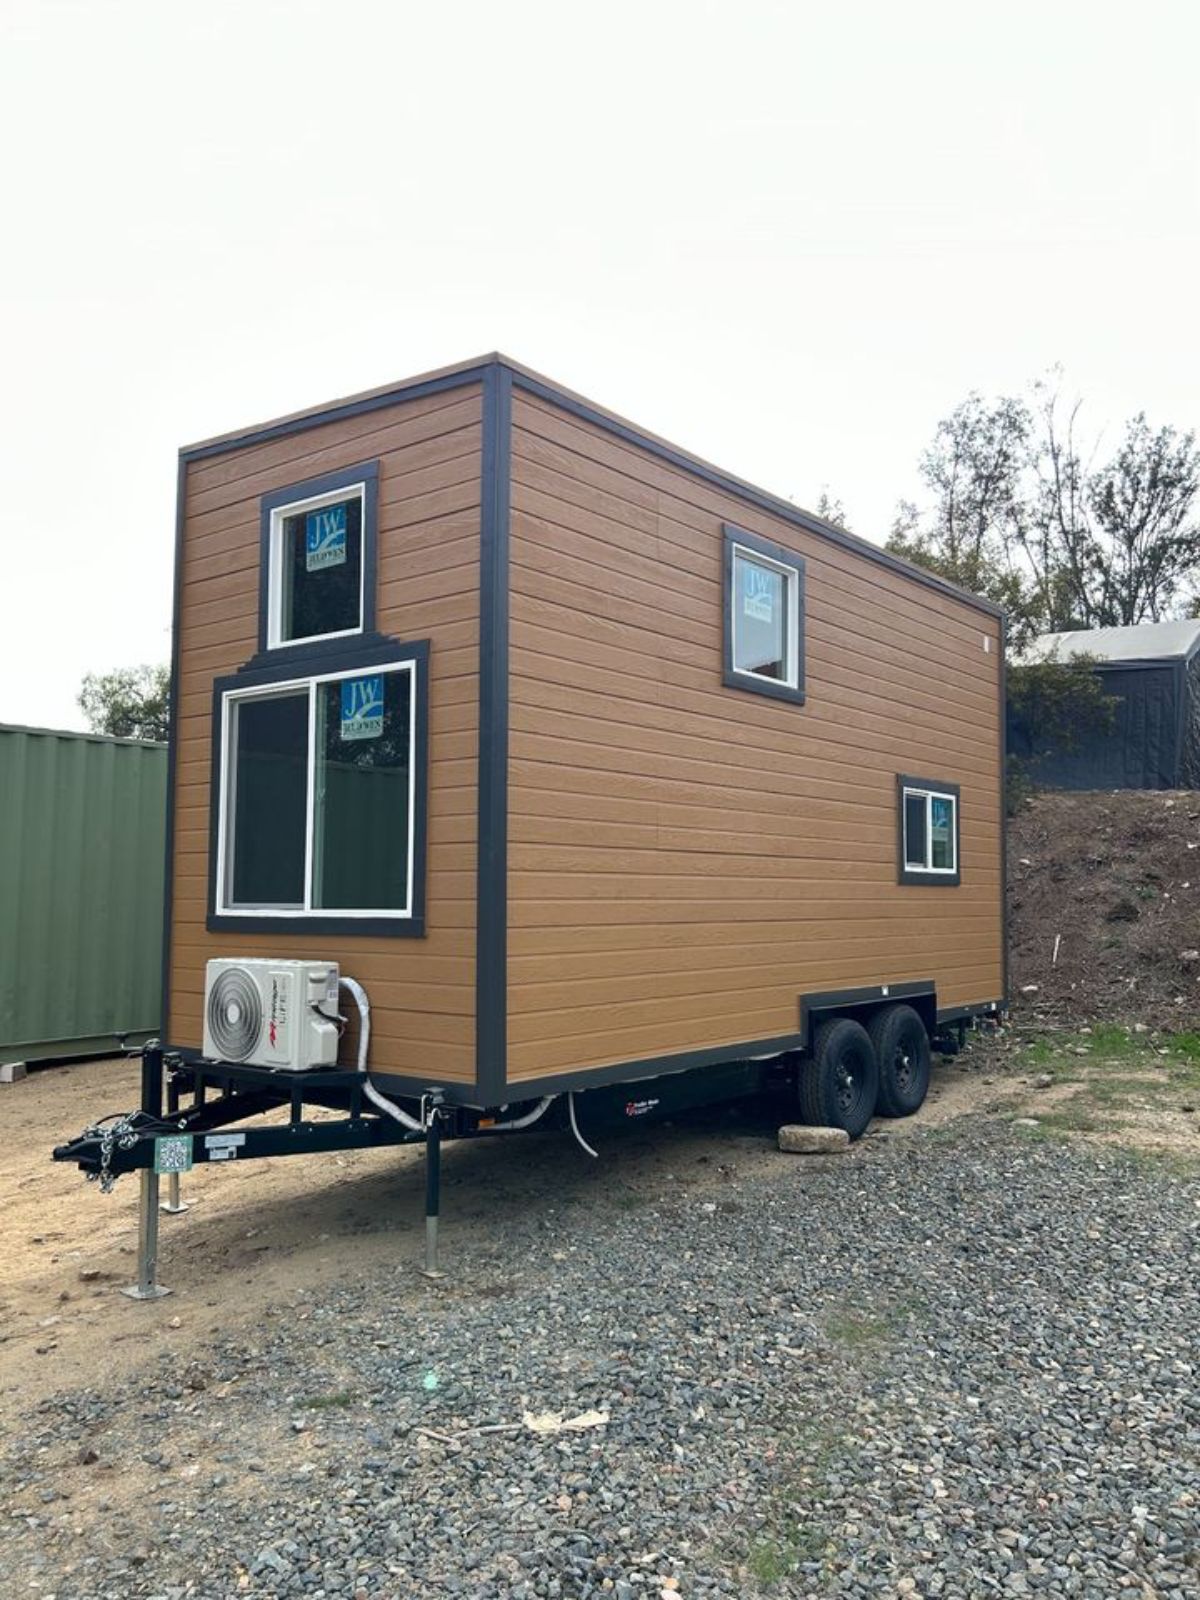 Brown wooden exterior of brand new tiny home